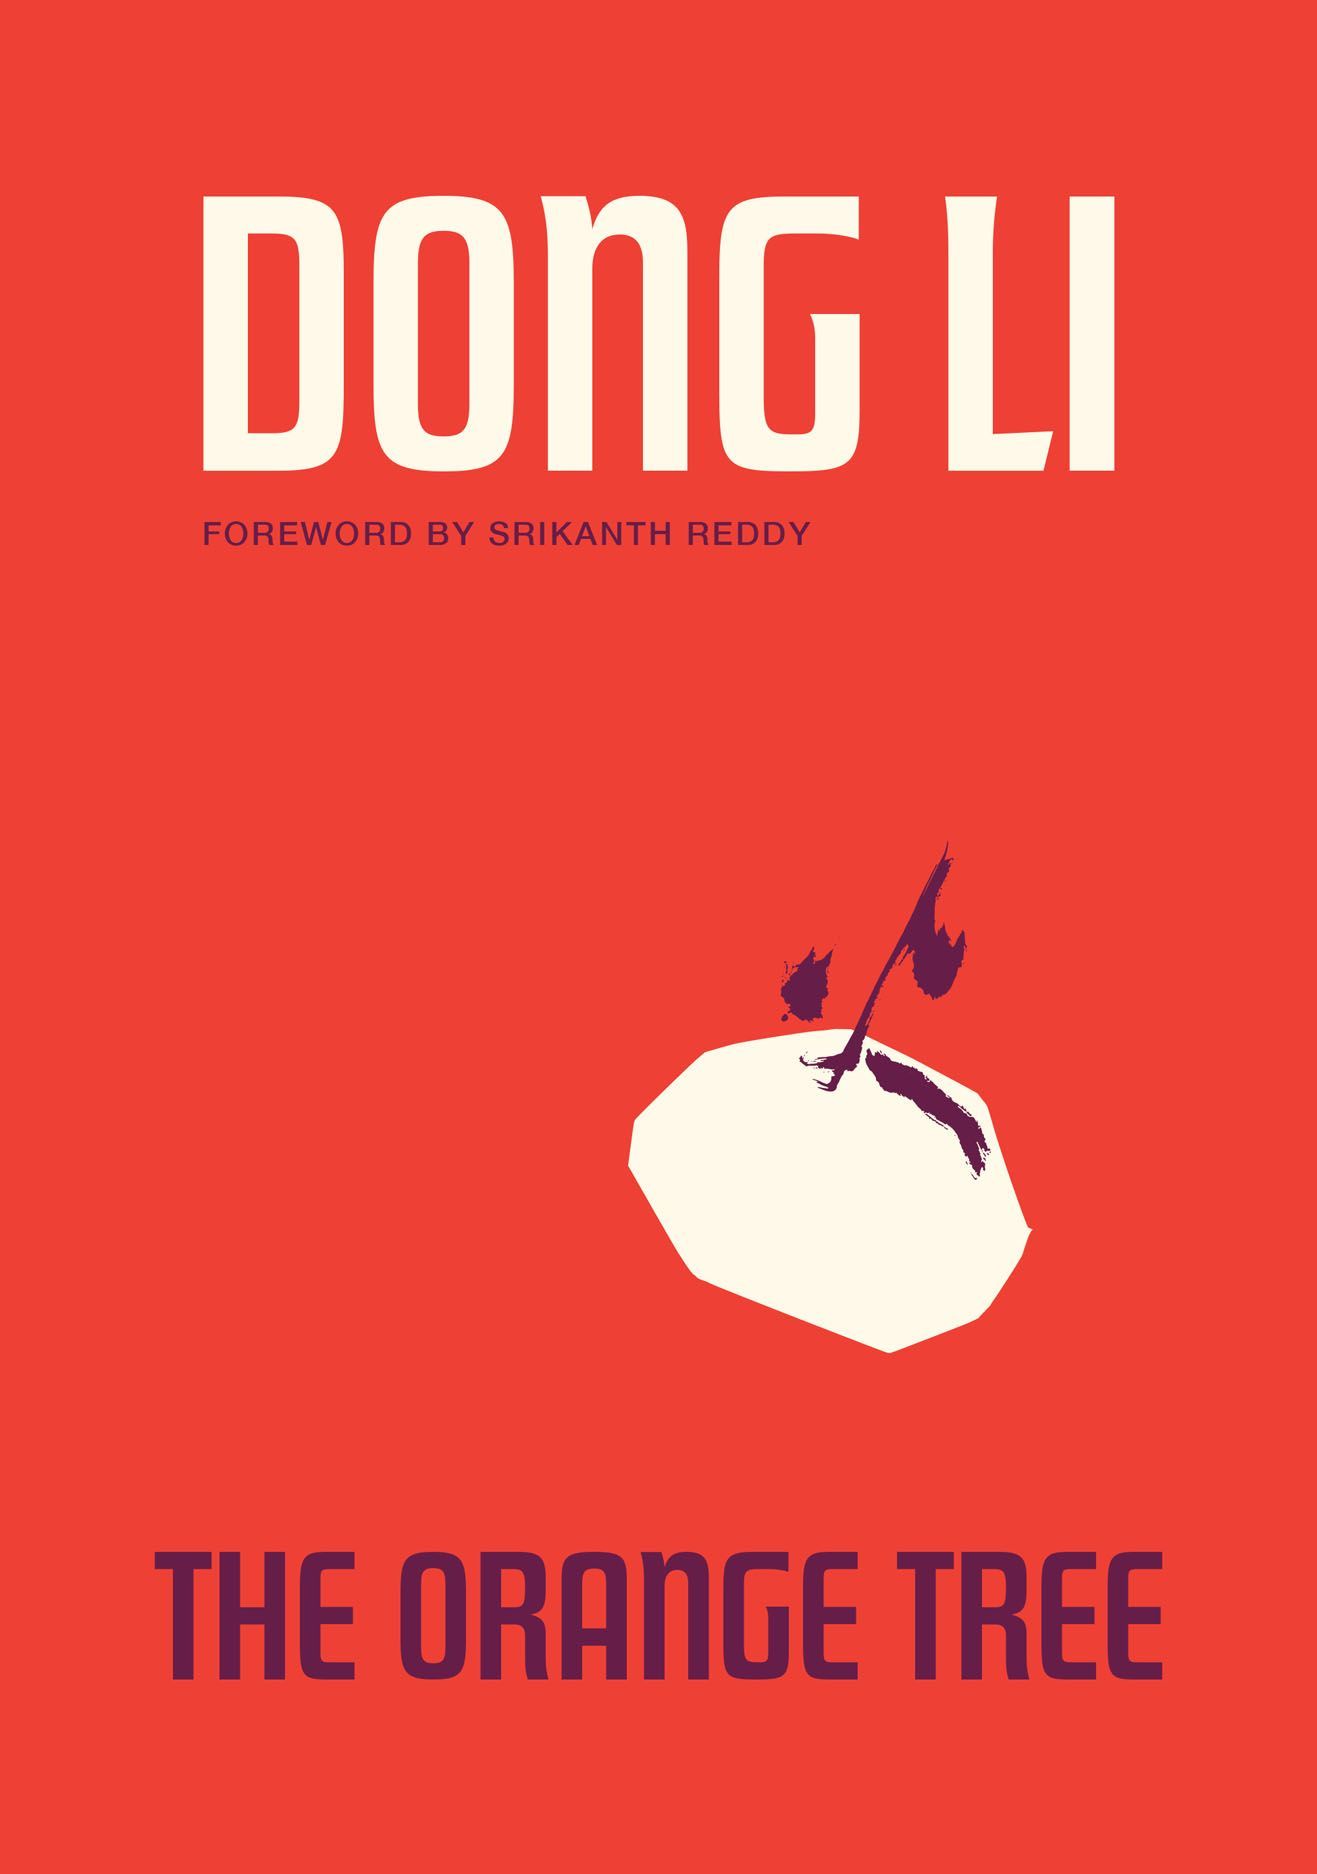 Cutting Together a History: On Dong Li’s “The Orange Tree”